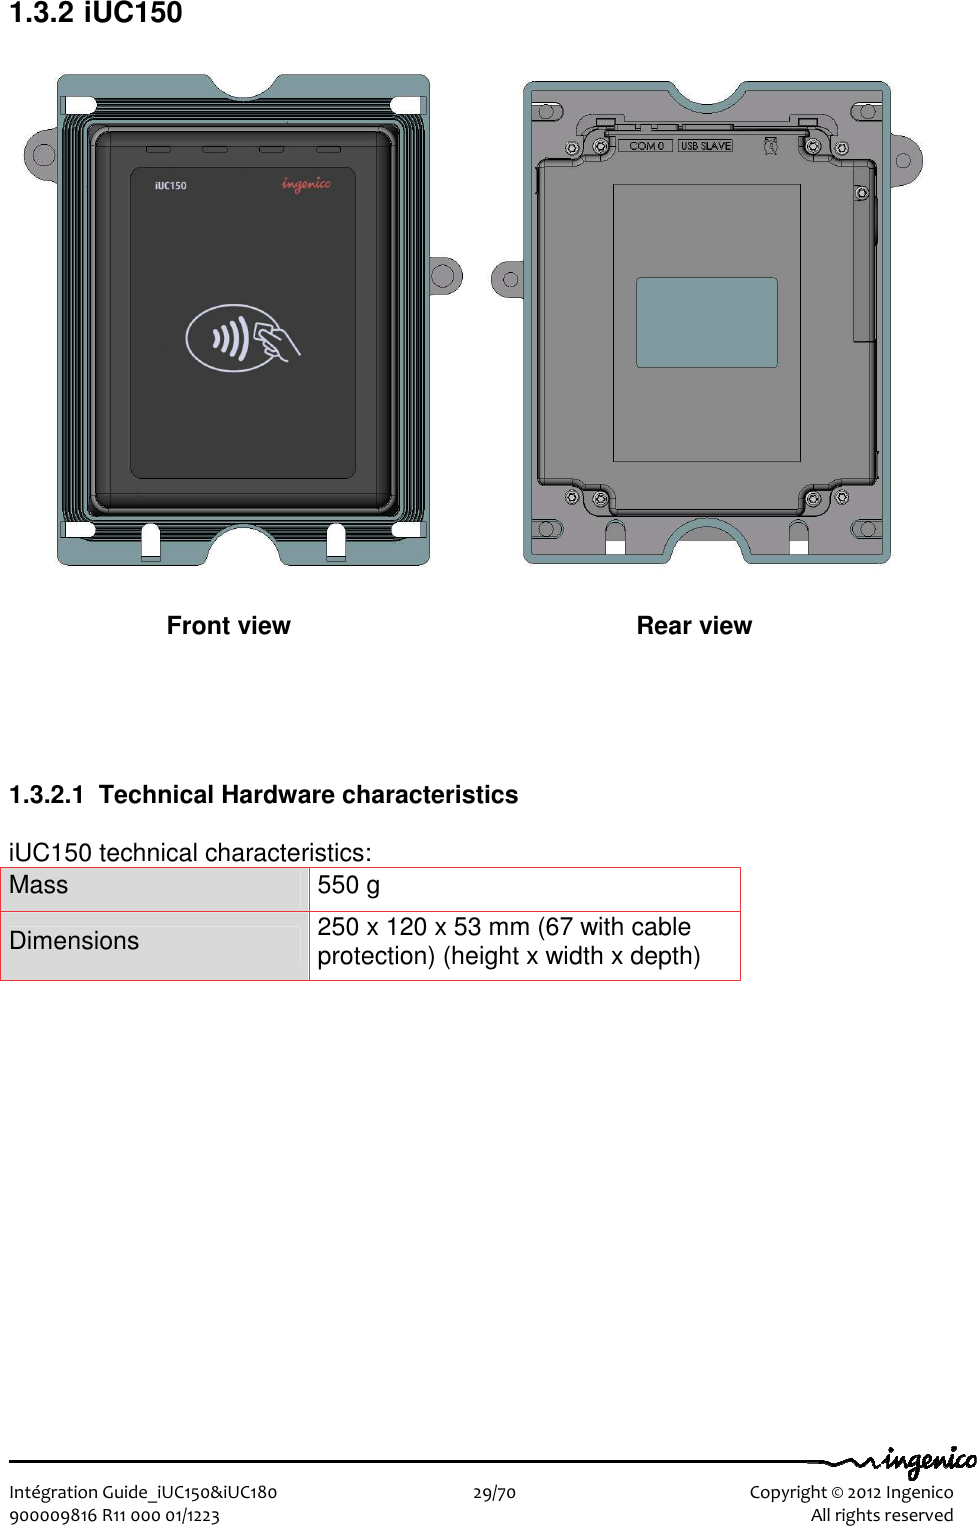   Intégration Guide_iUC150&amp;iUC180                        29/70    Copyright © 2012 Ingenico 900009816 R11 000 01/1223    All rights reserved 1.3.2 iUC150          1.3.2.1  Technical Hardware characteristics  iUC150 technical characteristics: Mass  550 g Dimensions  250 x 120 x 53 mm (67 with cable protection) (height x width x depth) Front view  Rear view 